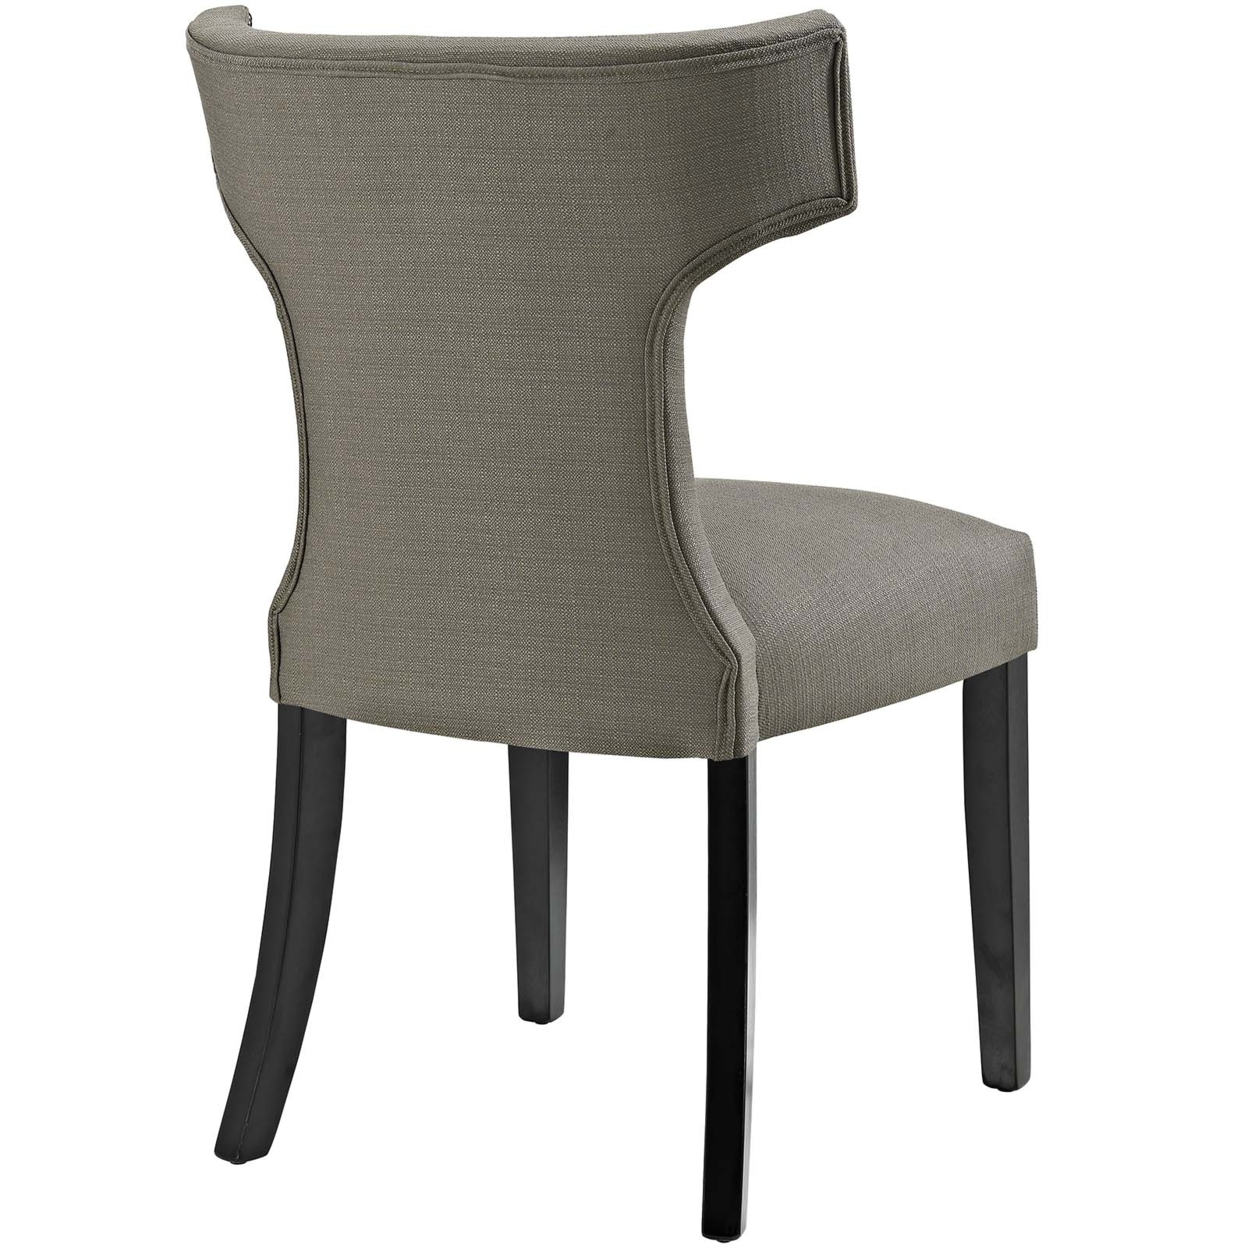 Curve Fabric Dining Chair, Granite